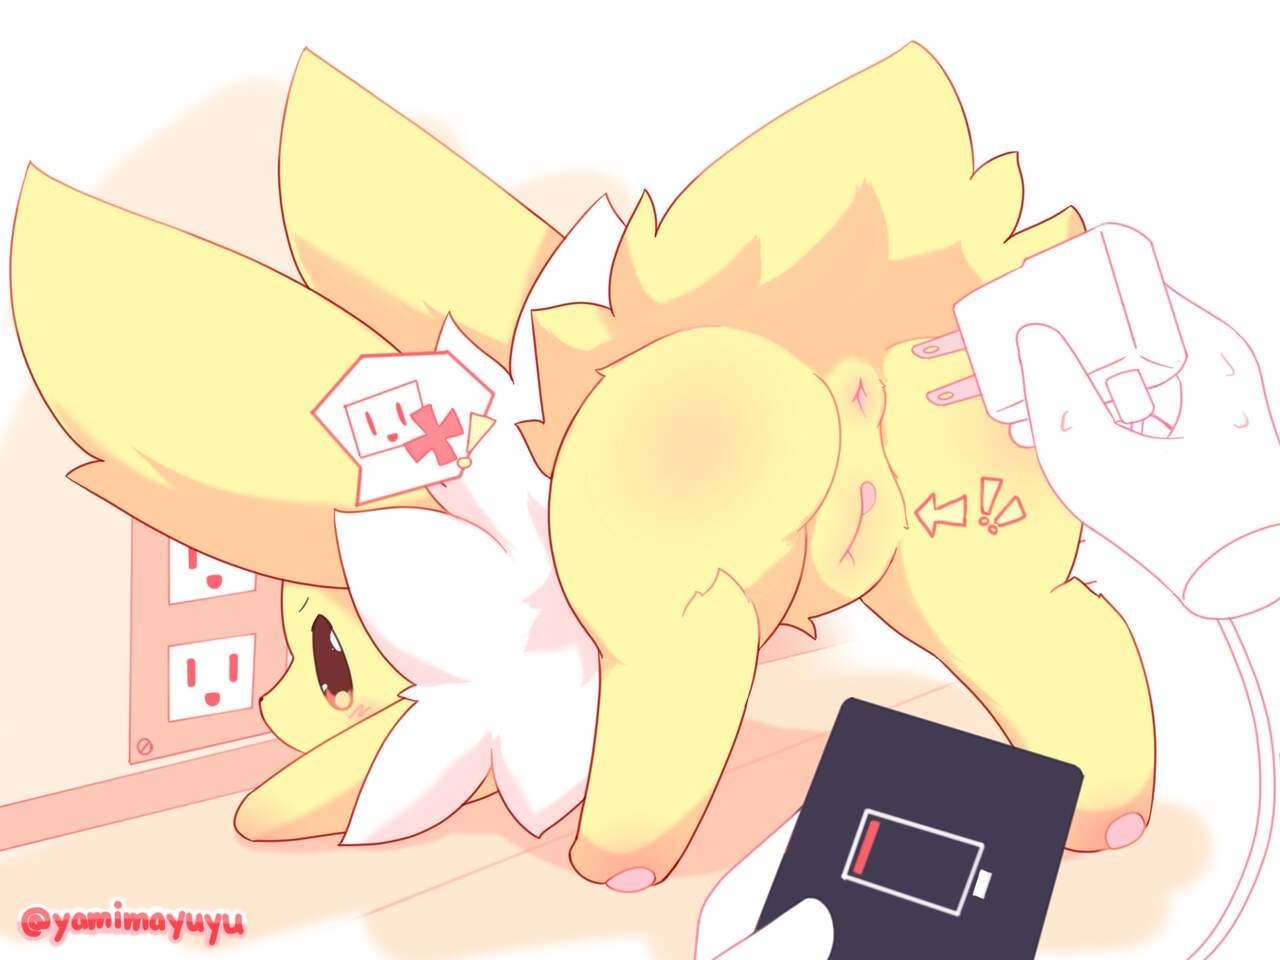 [Nekomayo] SUBSCRIBESTAR | Jolteon Phone Charger all visions 0